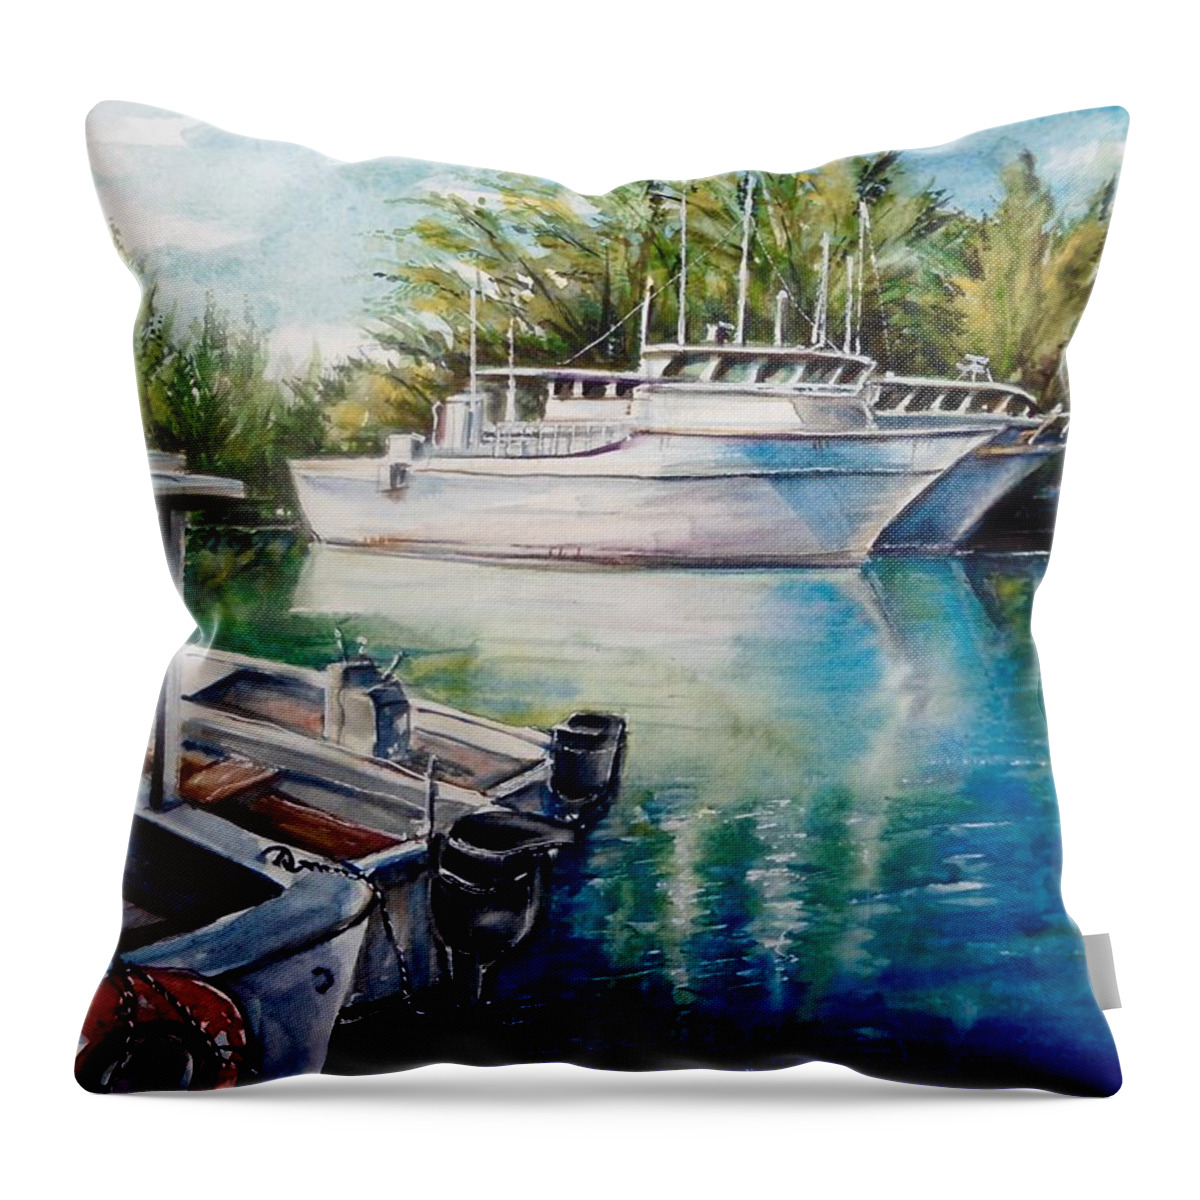 Boats Throw Pillow featuring the painting Coral Harbour 3 by Katerina Kovatcheva